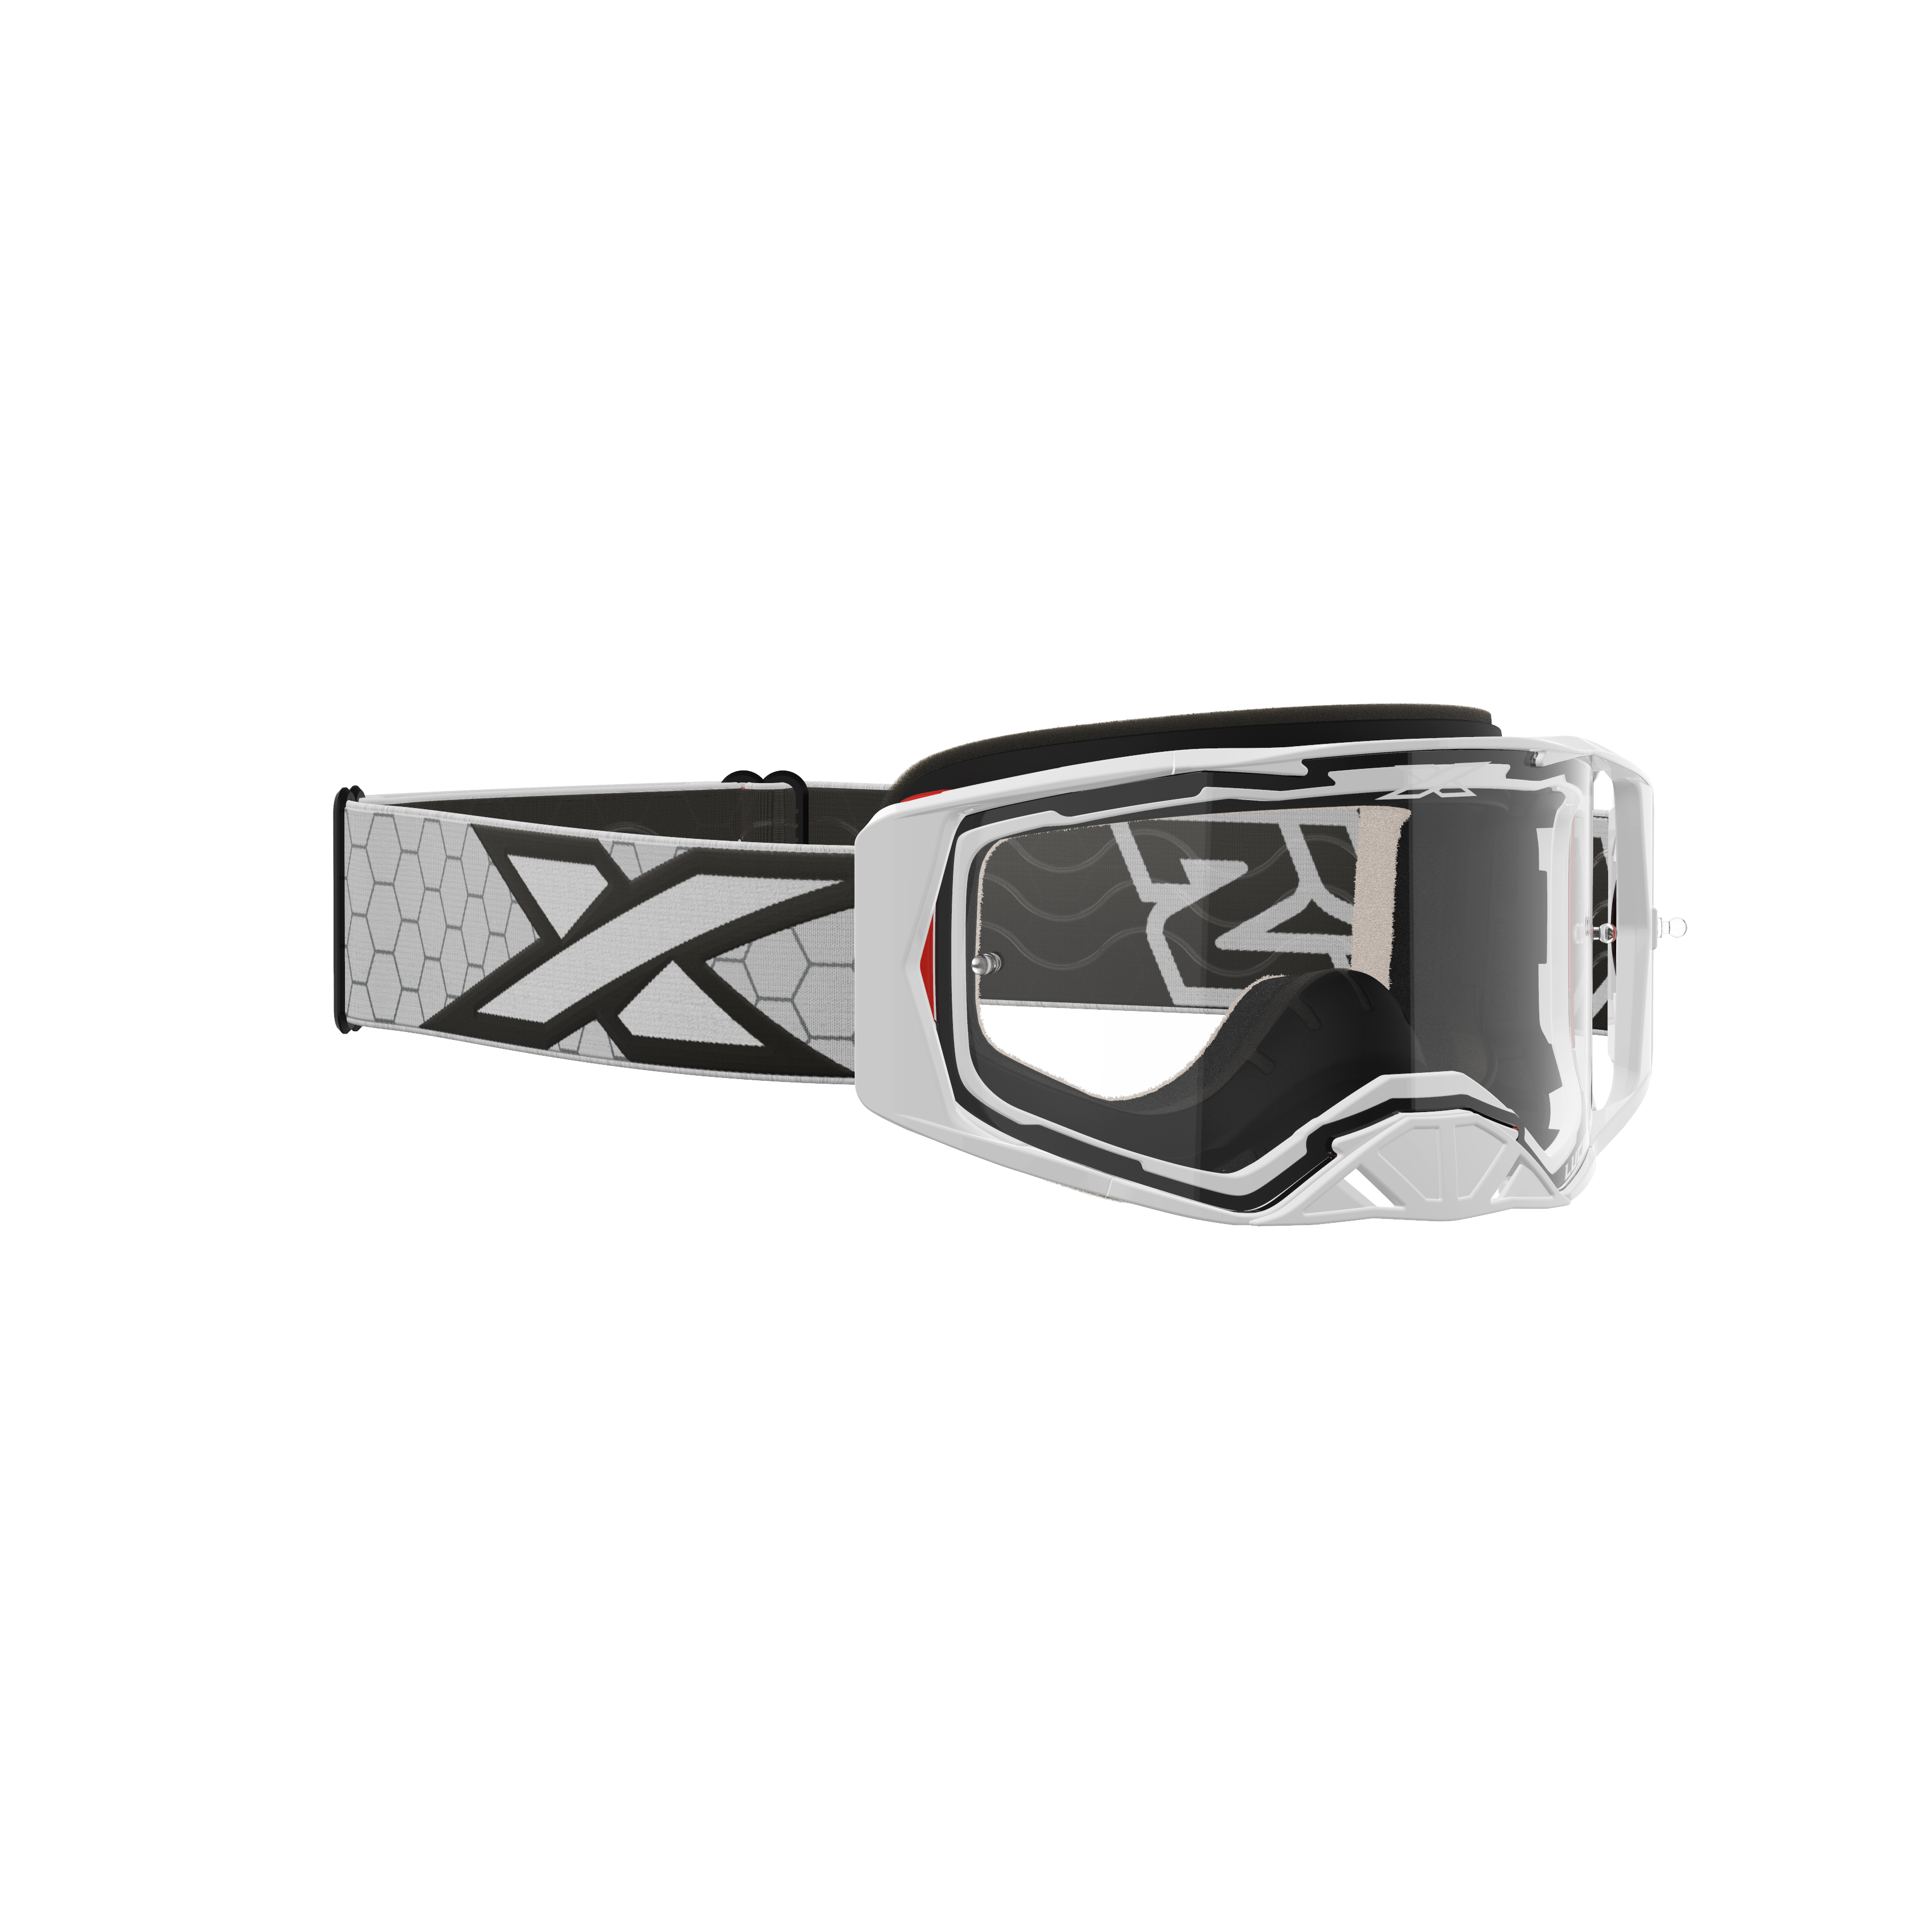 EKS Brand Lucid Motocross Goggle with Clear Lens